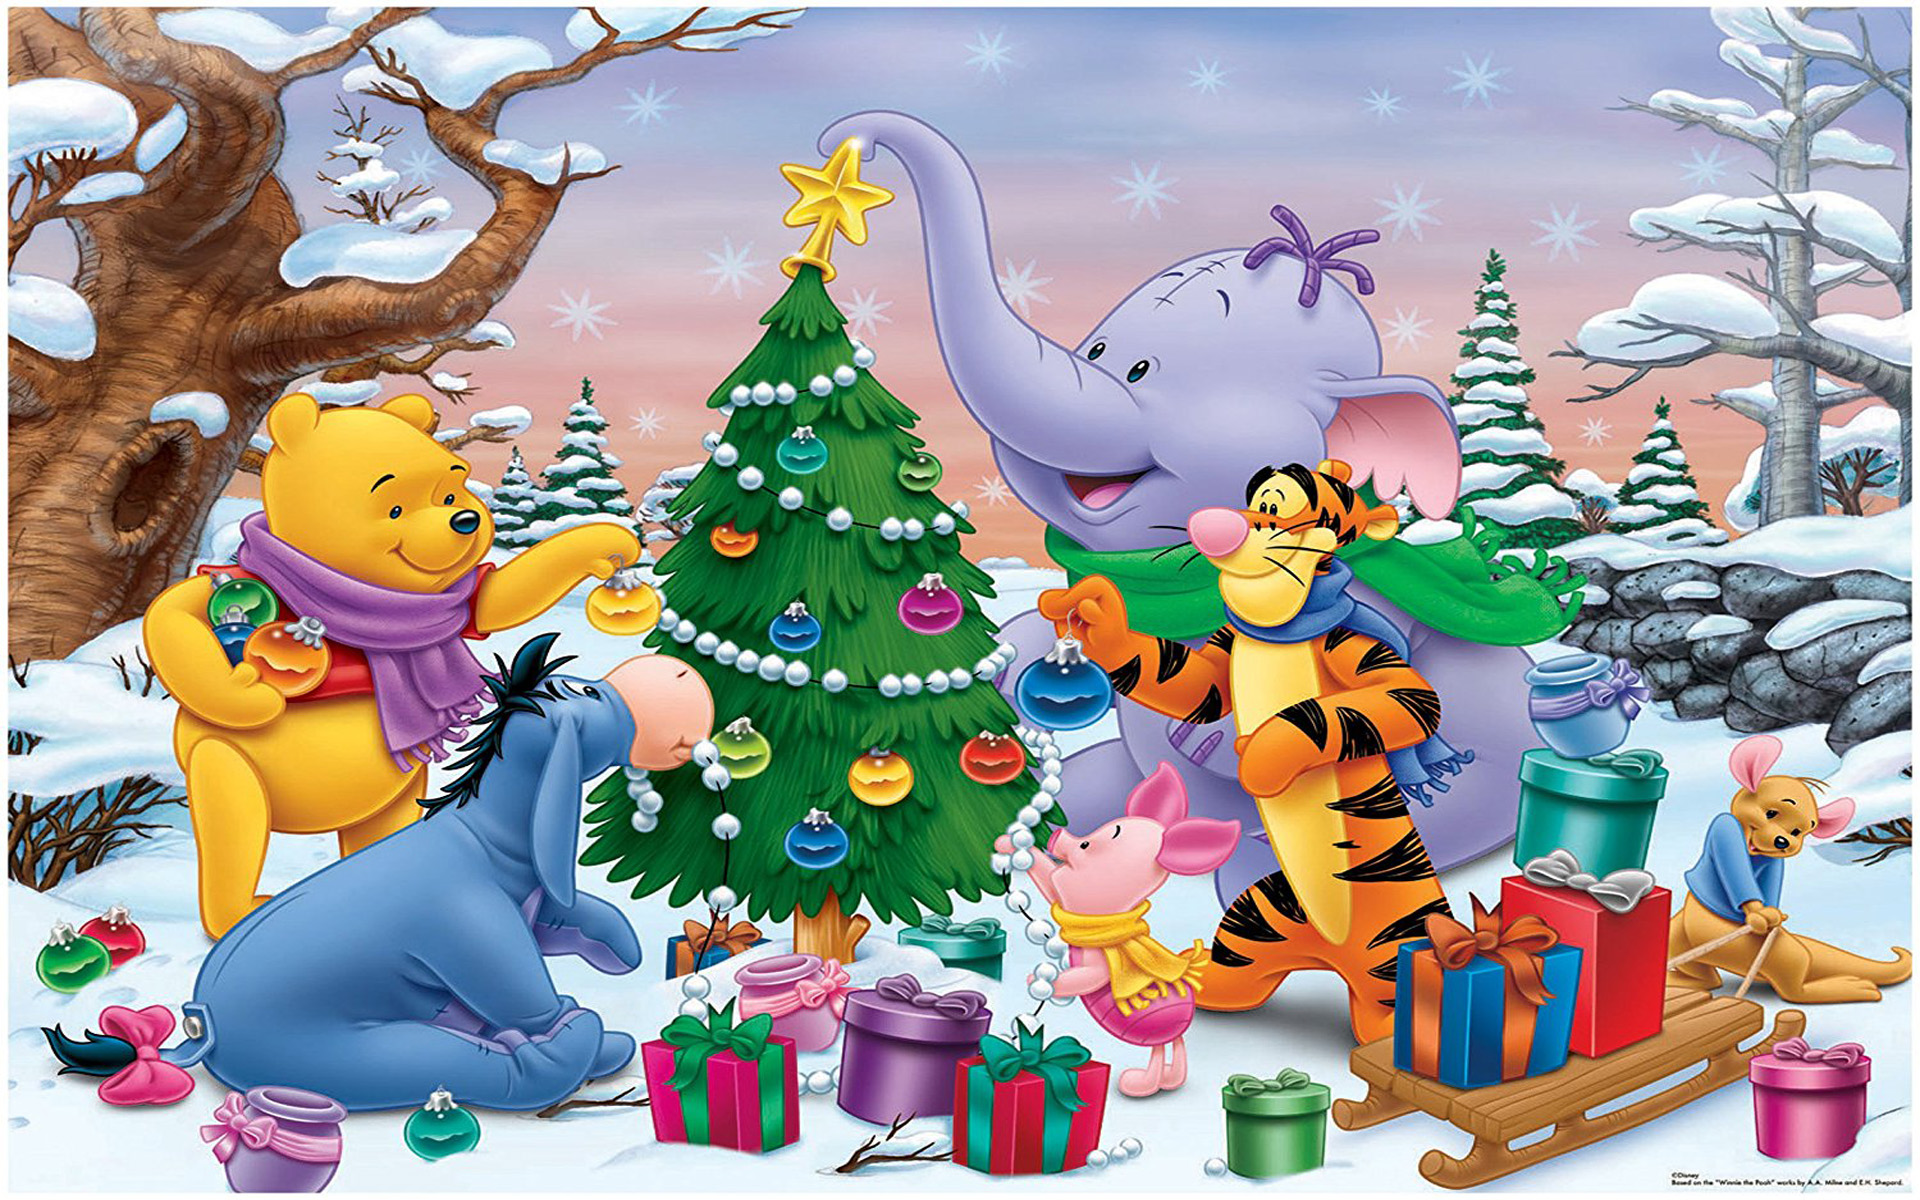 Cartoon Winnie The Pooh And Friends Decorating The Christmas Tree